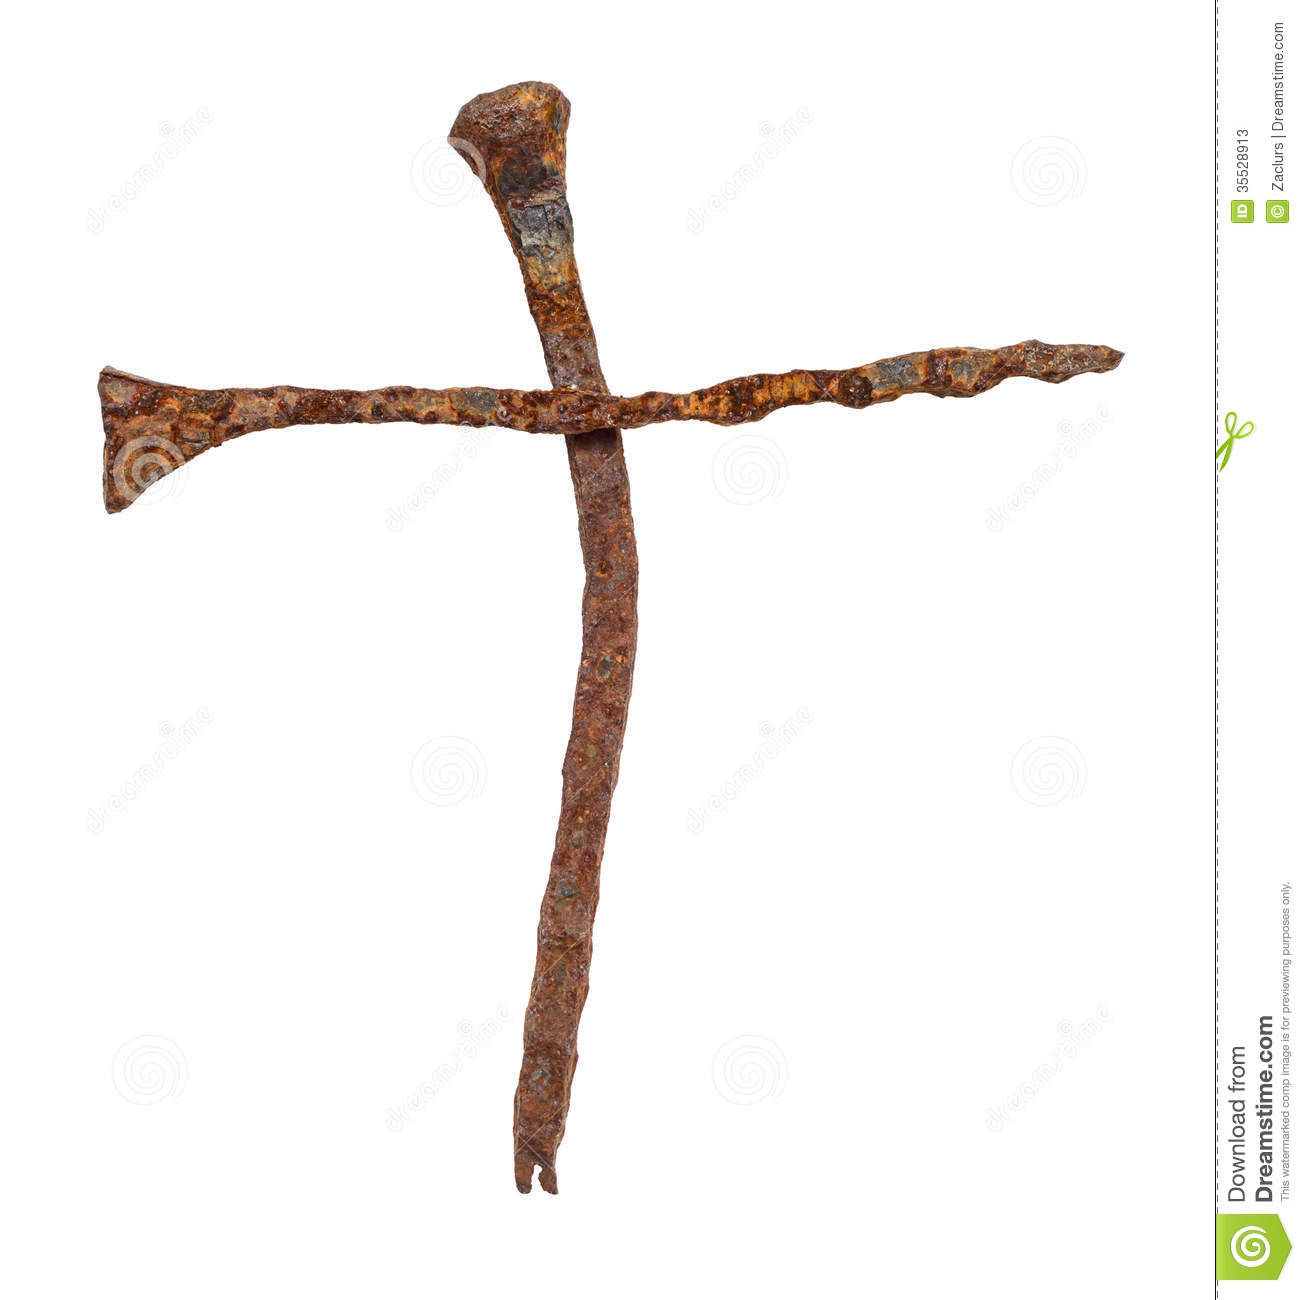 Handforged Rusty Nails In Shape Of Cross Isolated On White Background